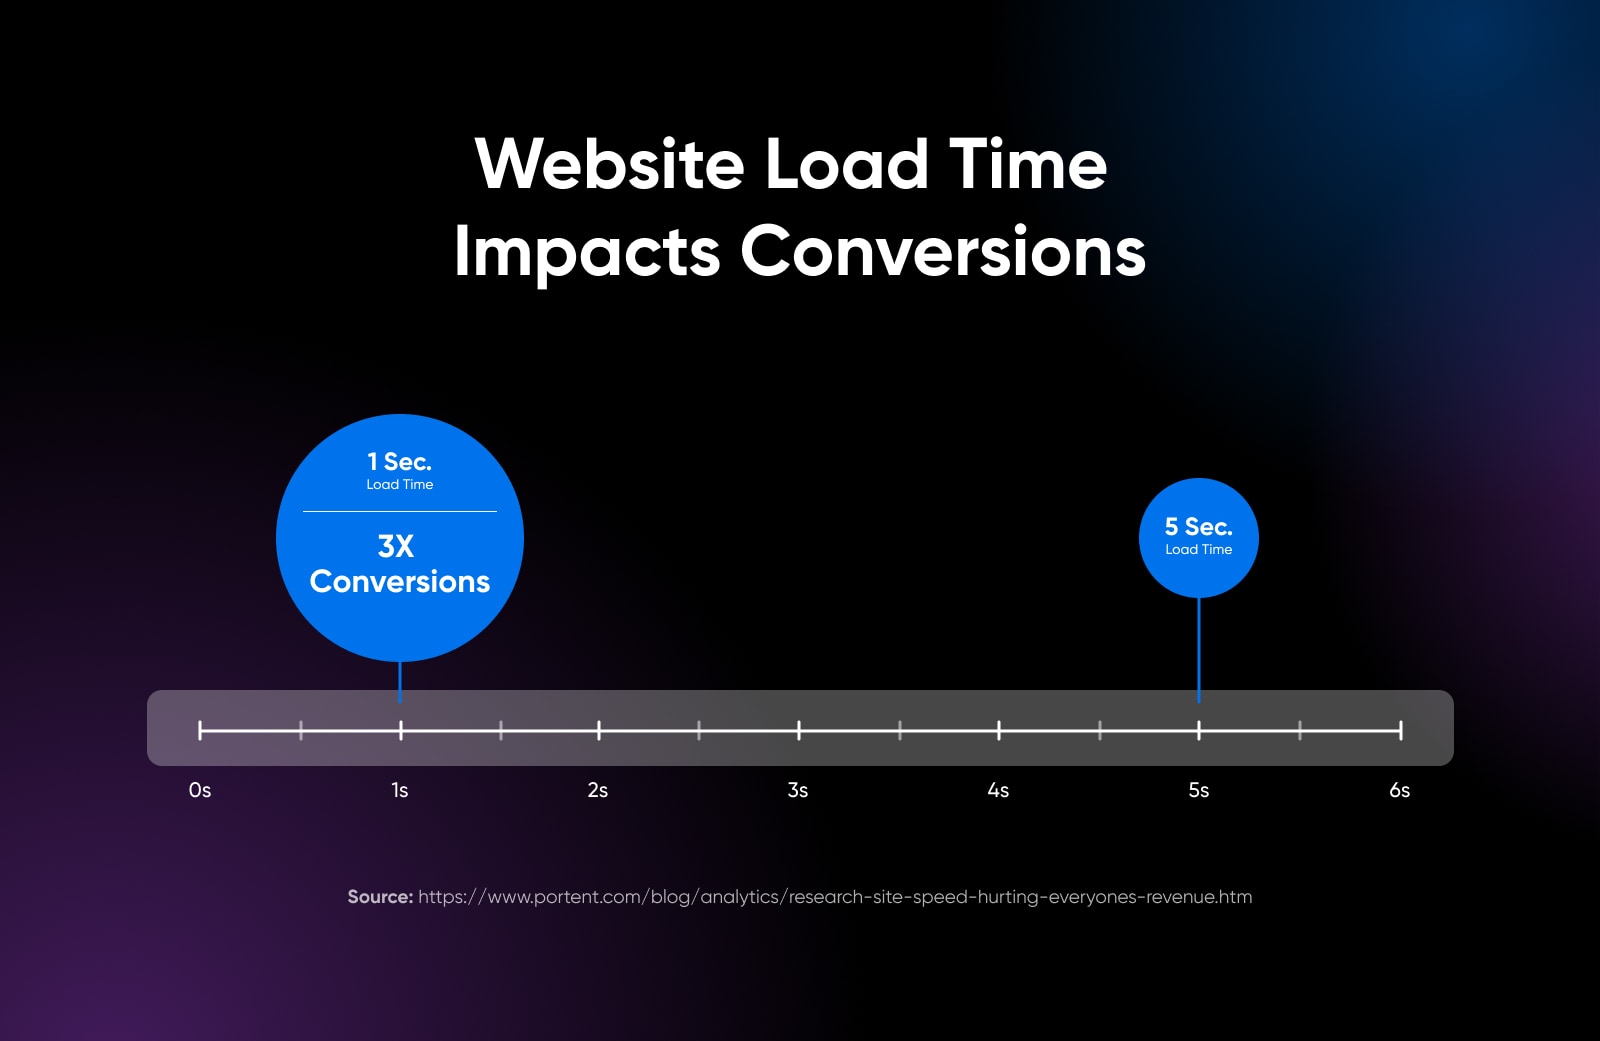 timeline graph showing how website load time impacts conversation -- faster load times (1 second) has 3x more conversations than a 5 second load time